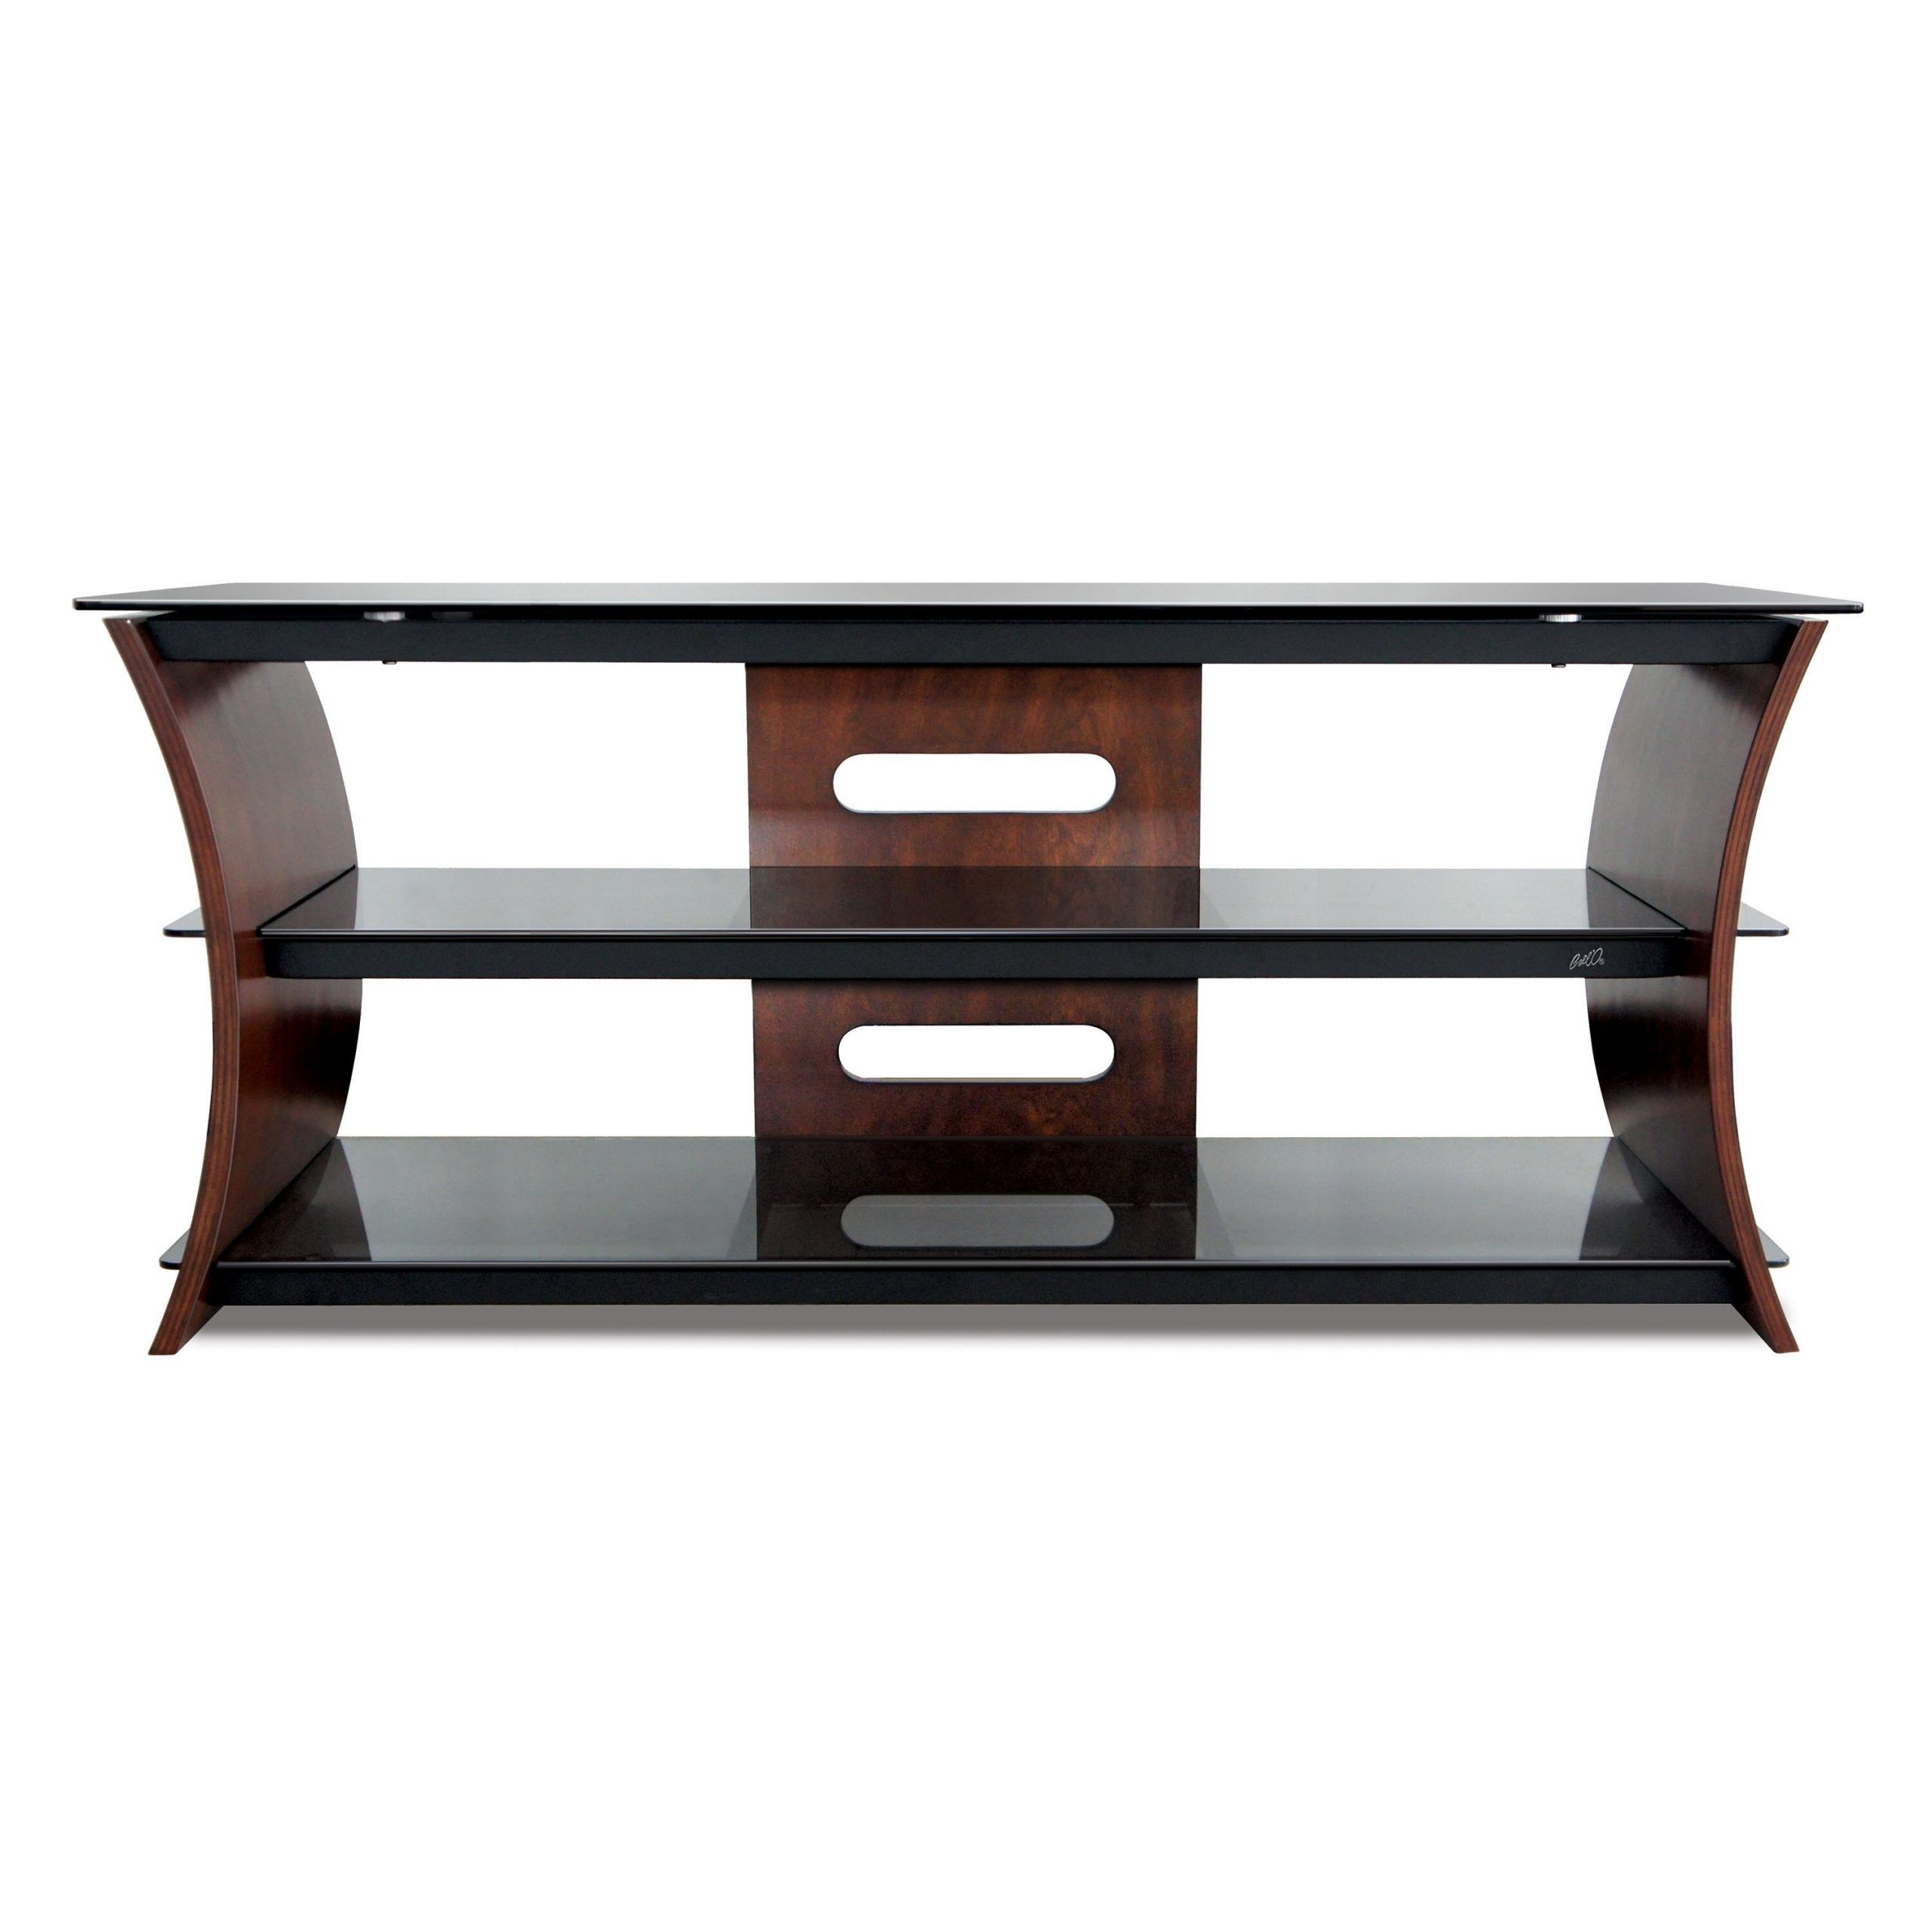 Bello Tv Stand & Reviews | Wayfair (View 7 of 15)